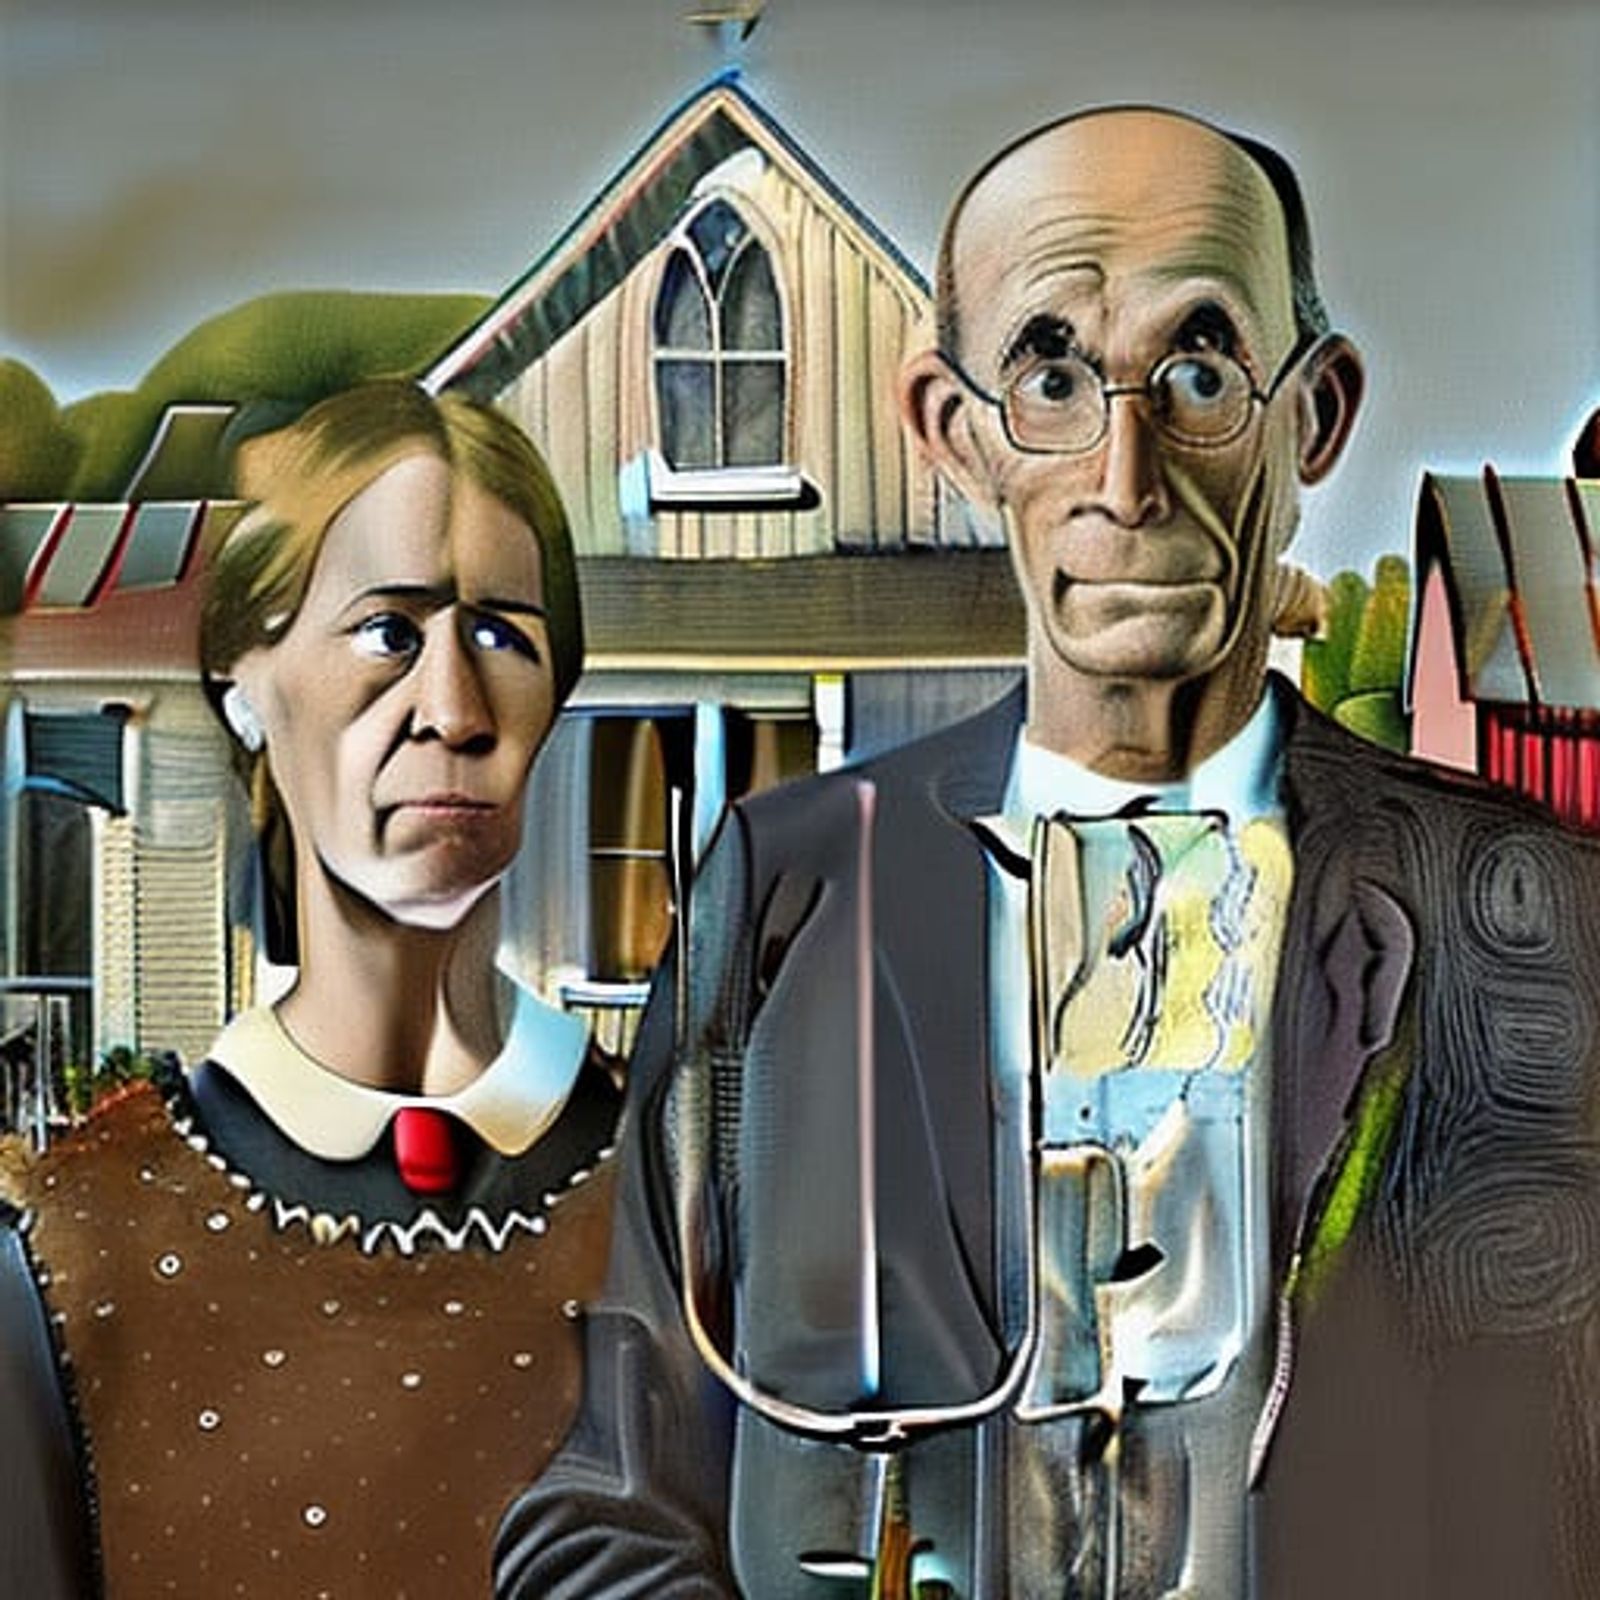 american gothic paintings